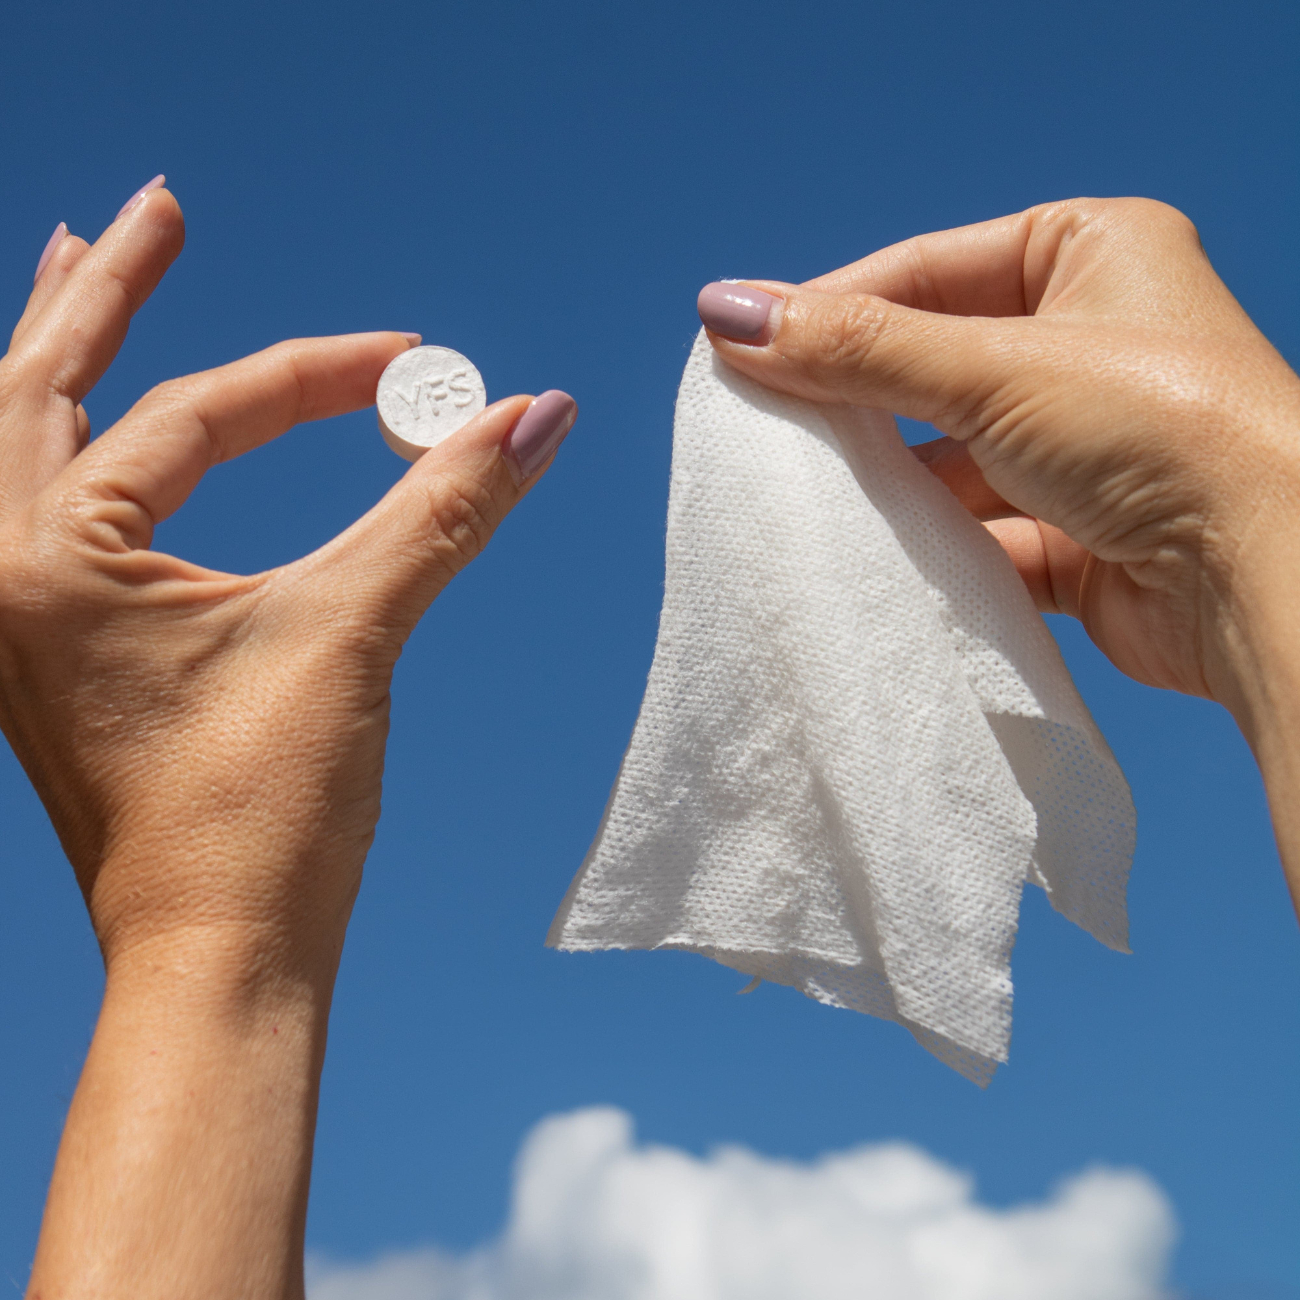 Image of 2 hands against the sky holding a cleansing cloth